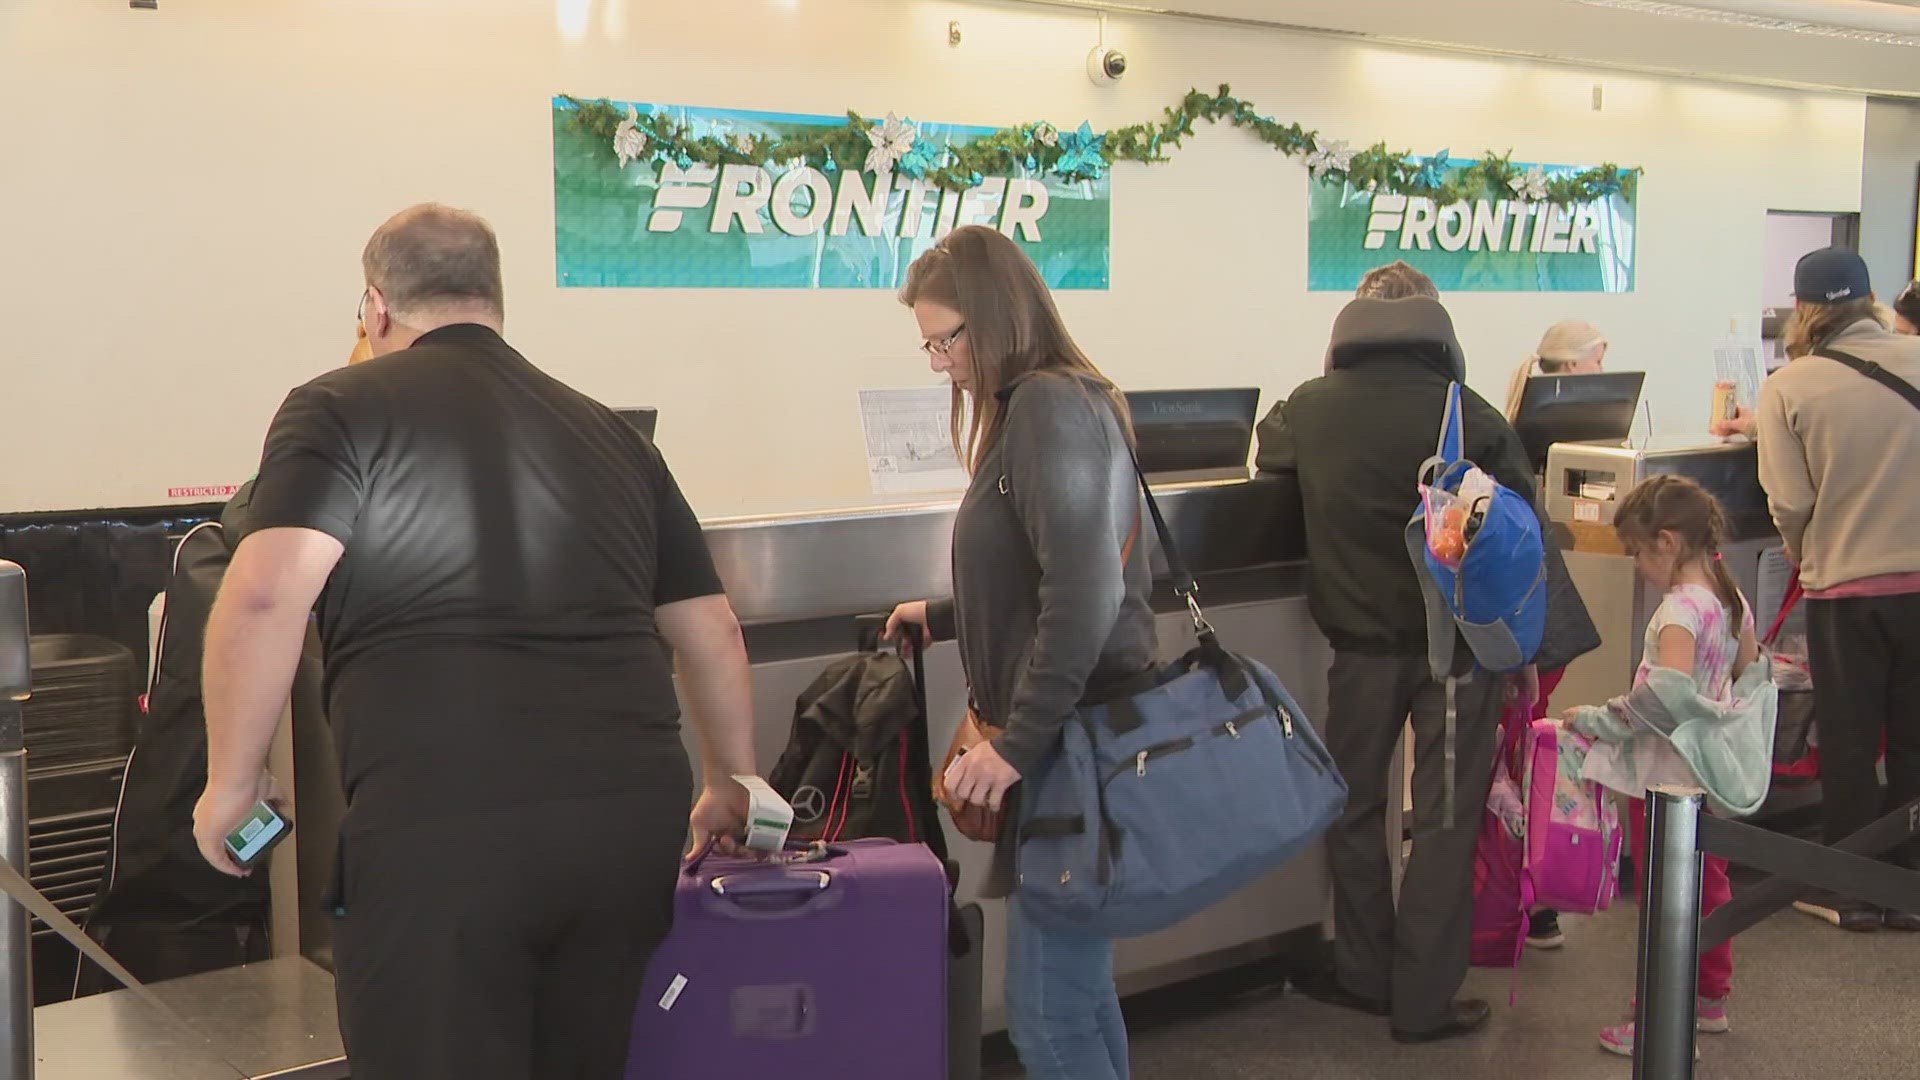 Frontier Airlines says that flights to the new destinations start at $19.